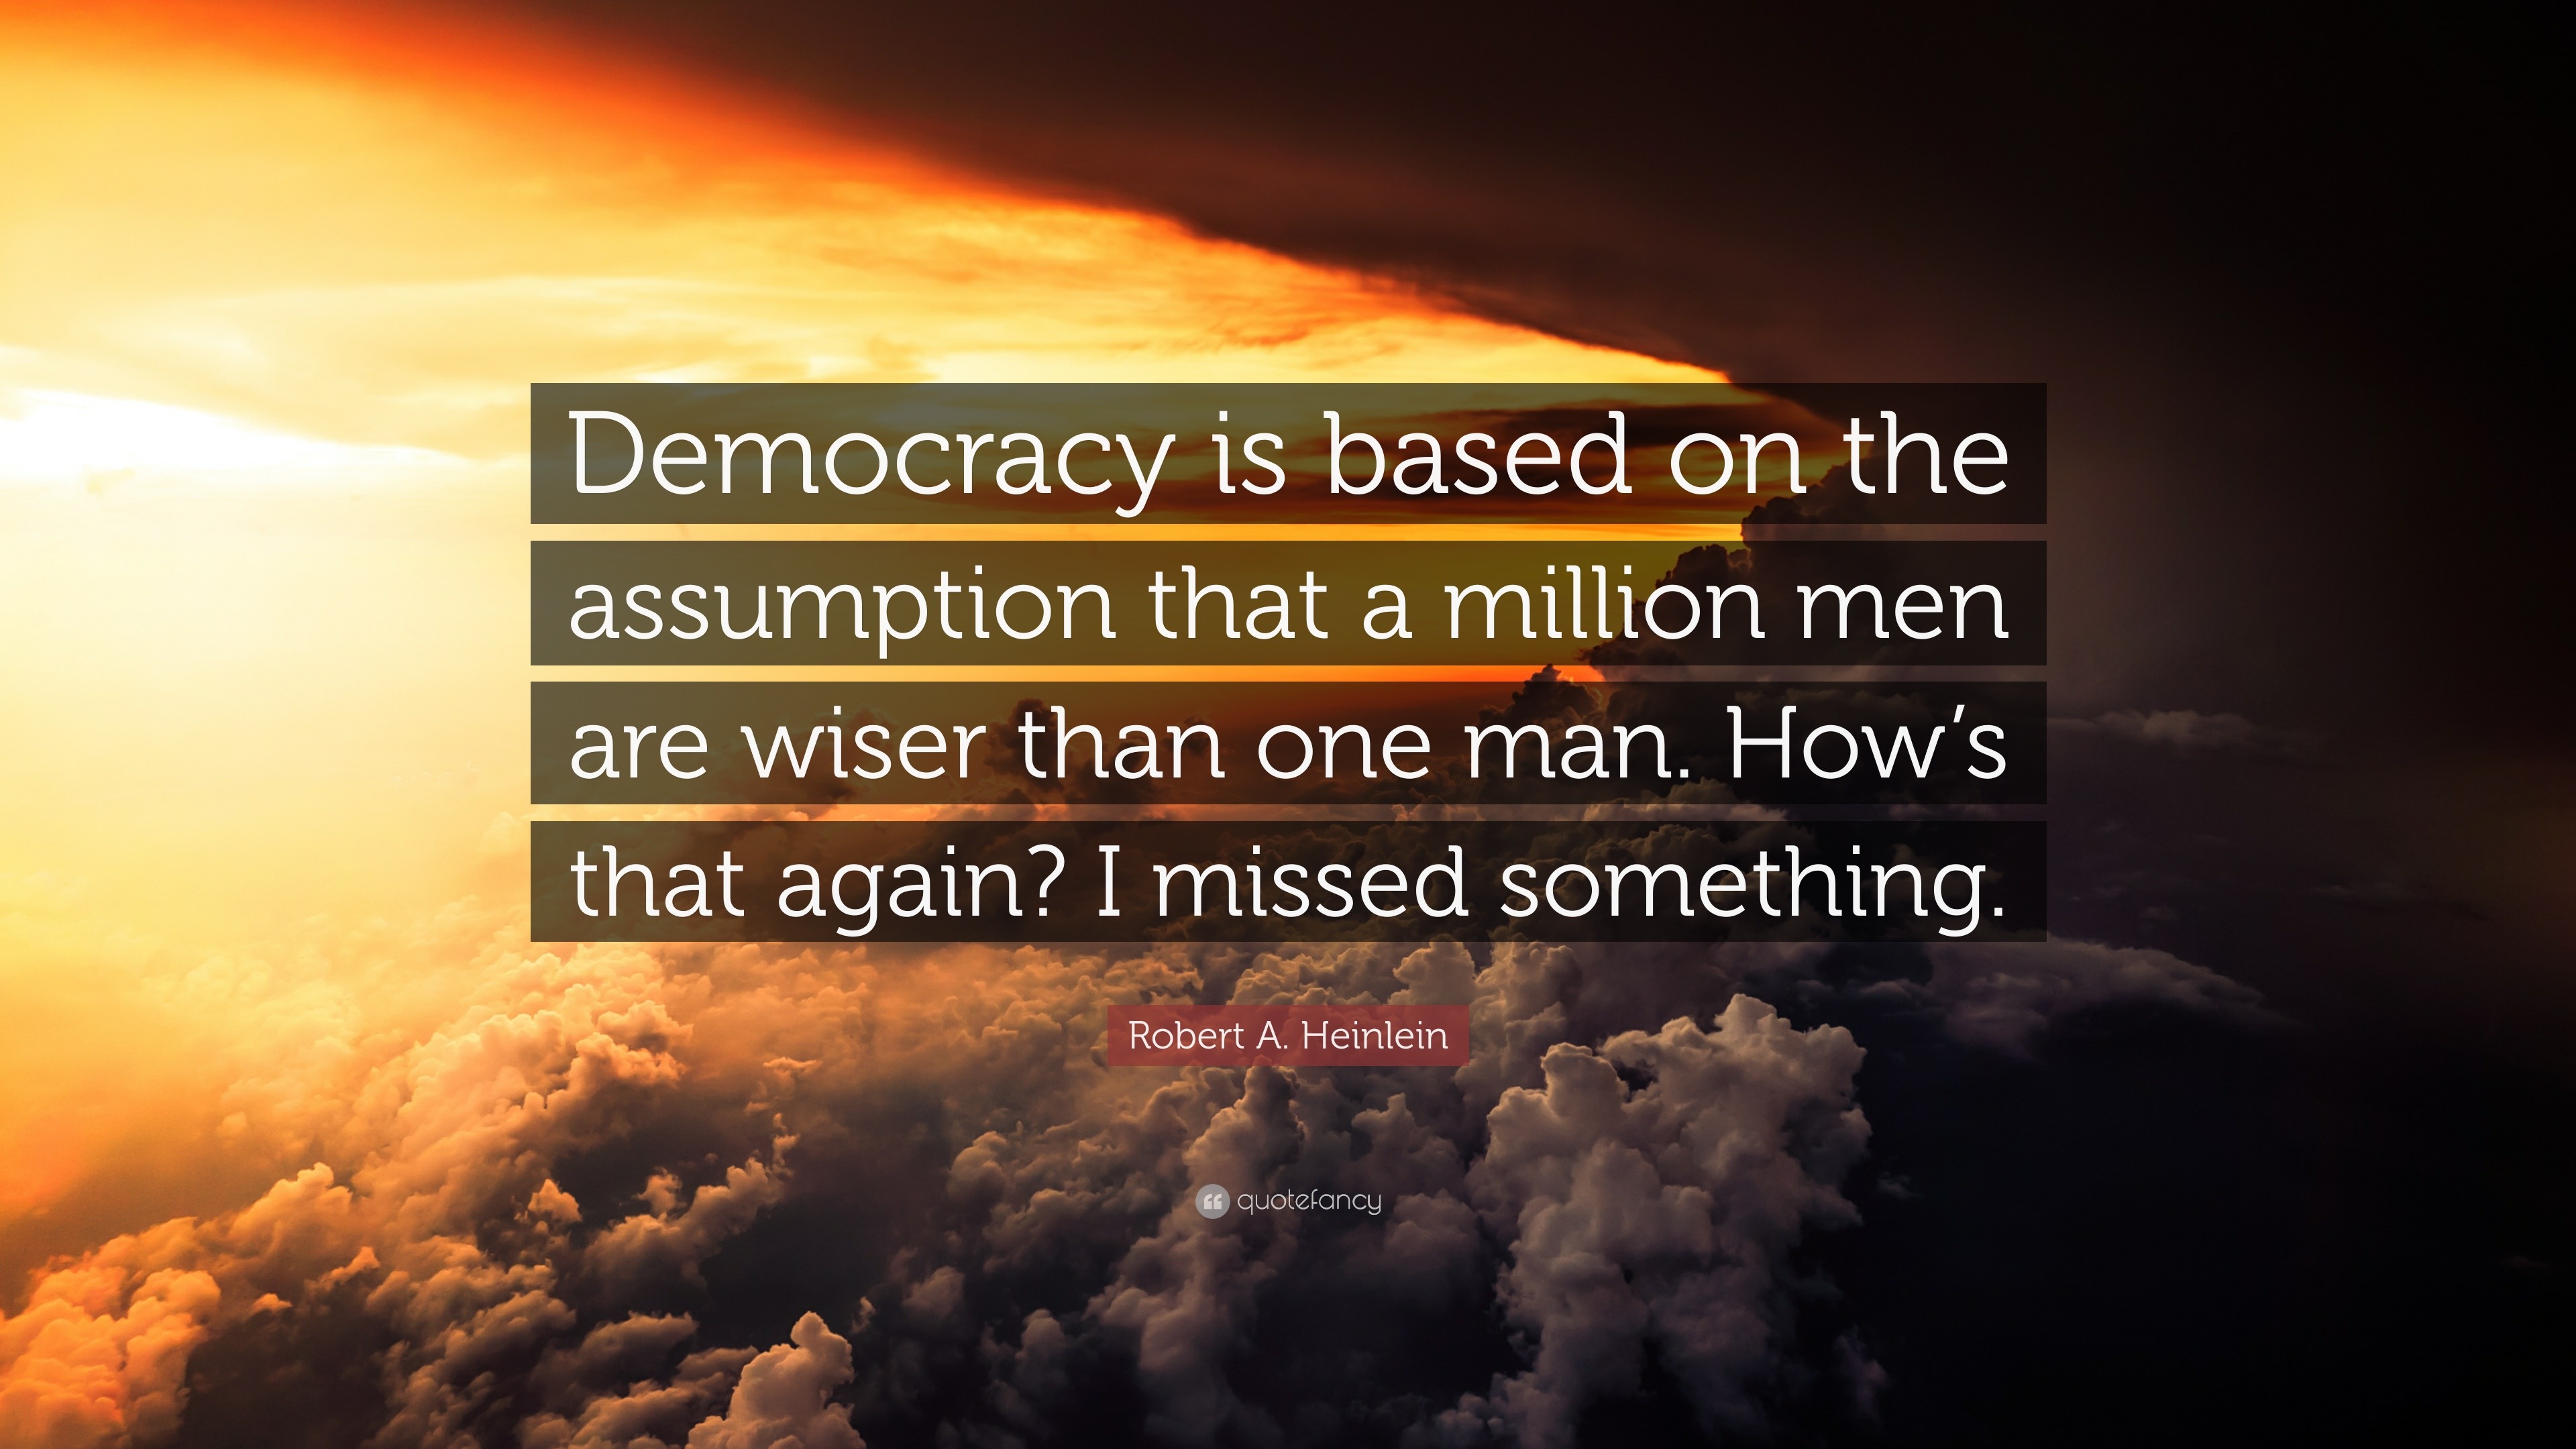 Robert A Heinlein Quote “democracy Is Based On The Assumption That A